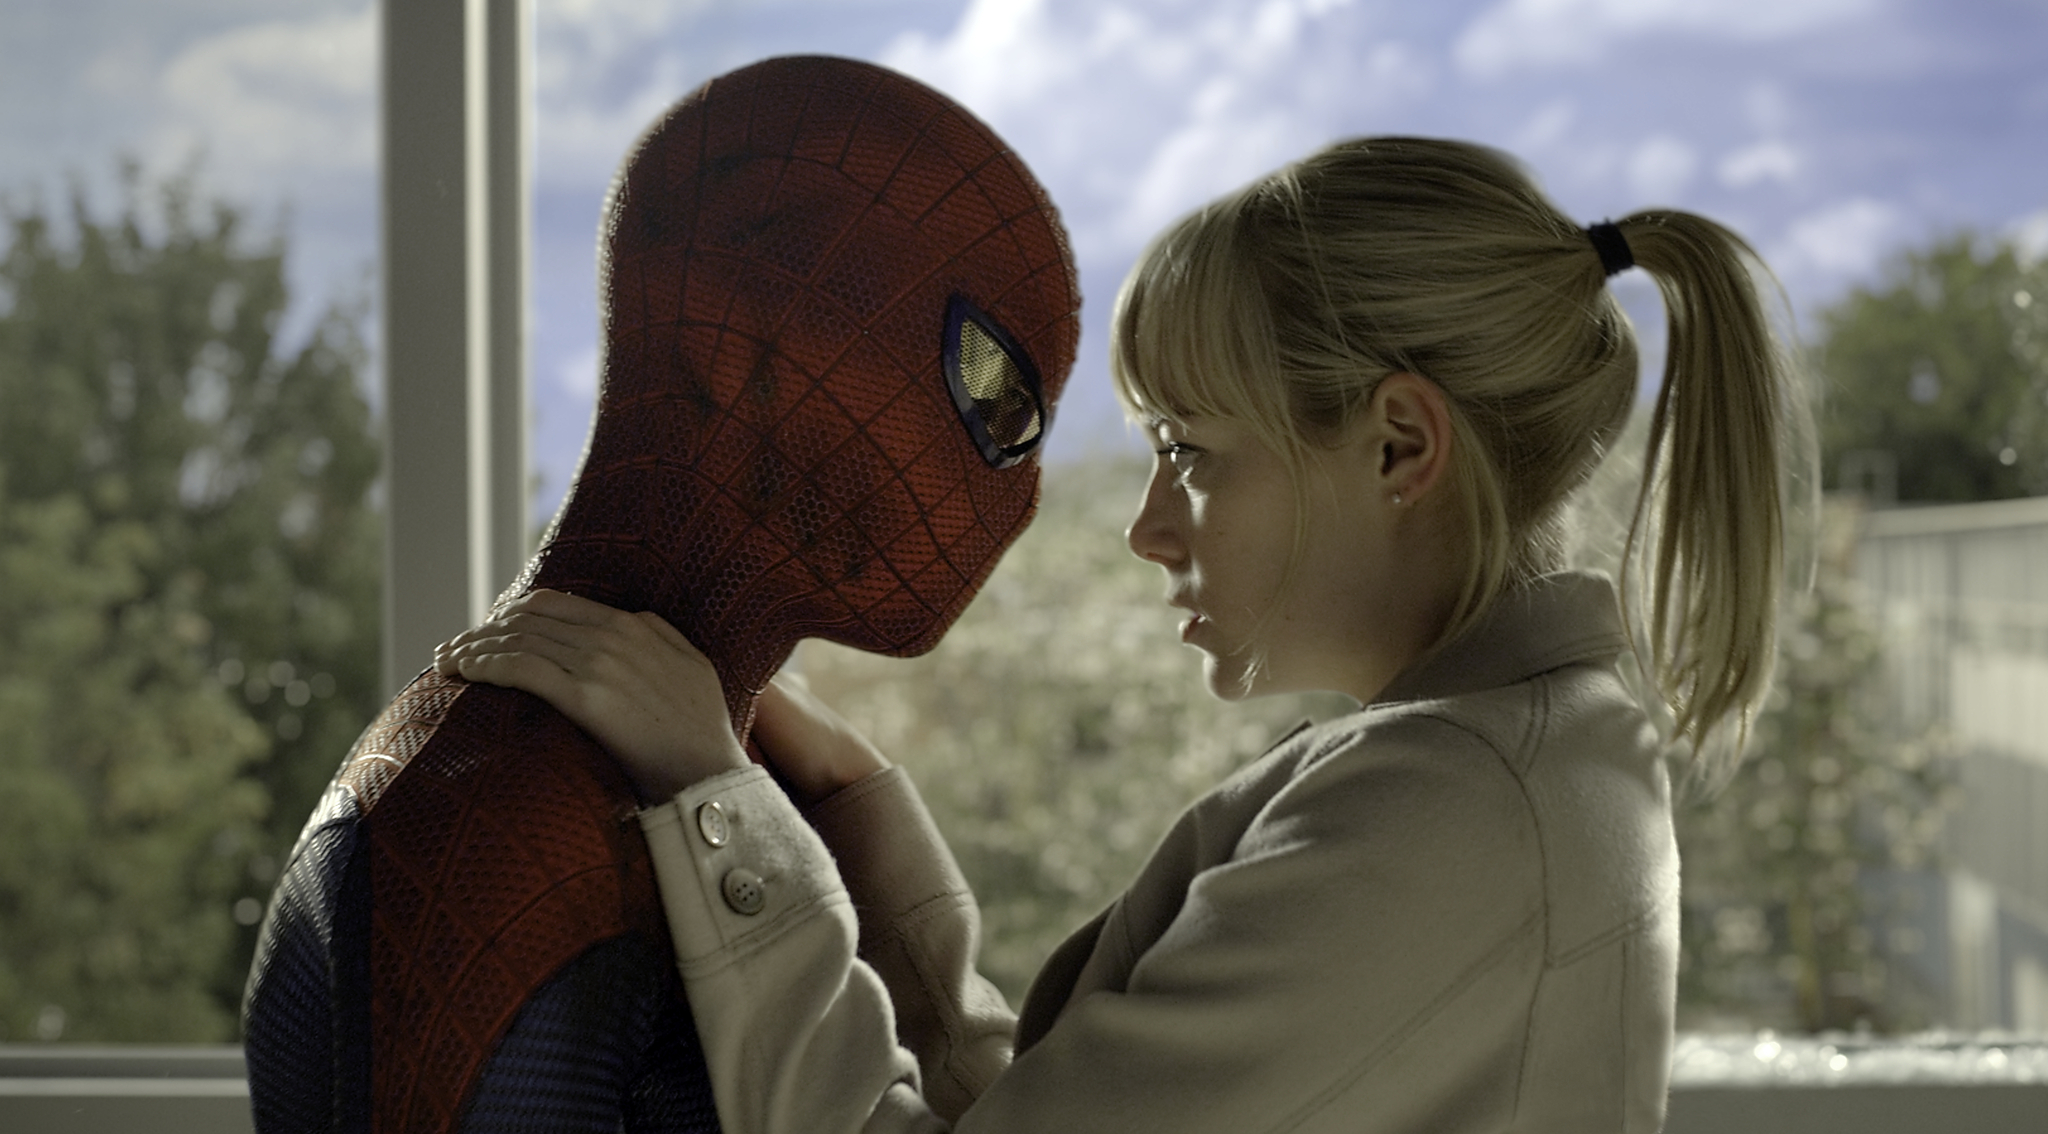 What’s New On Netflix: The Amazing Spider-Man